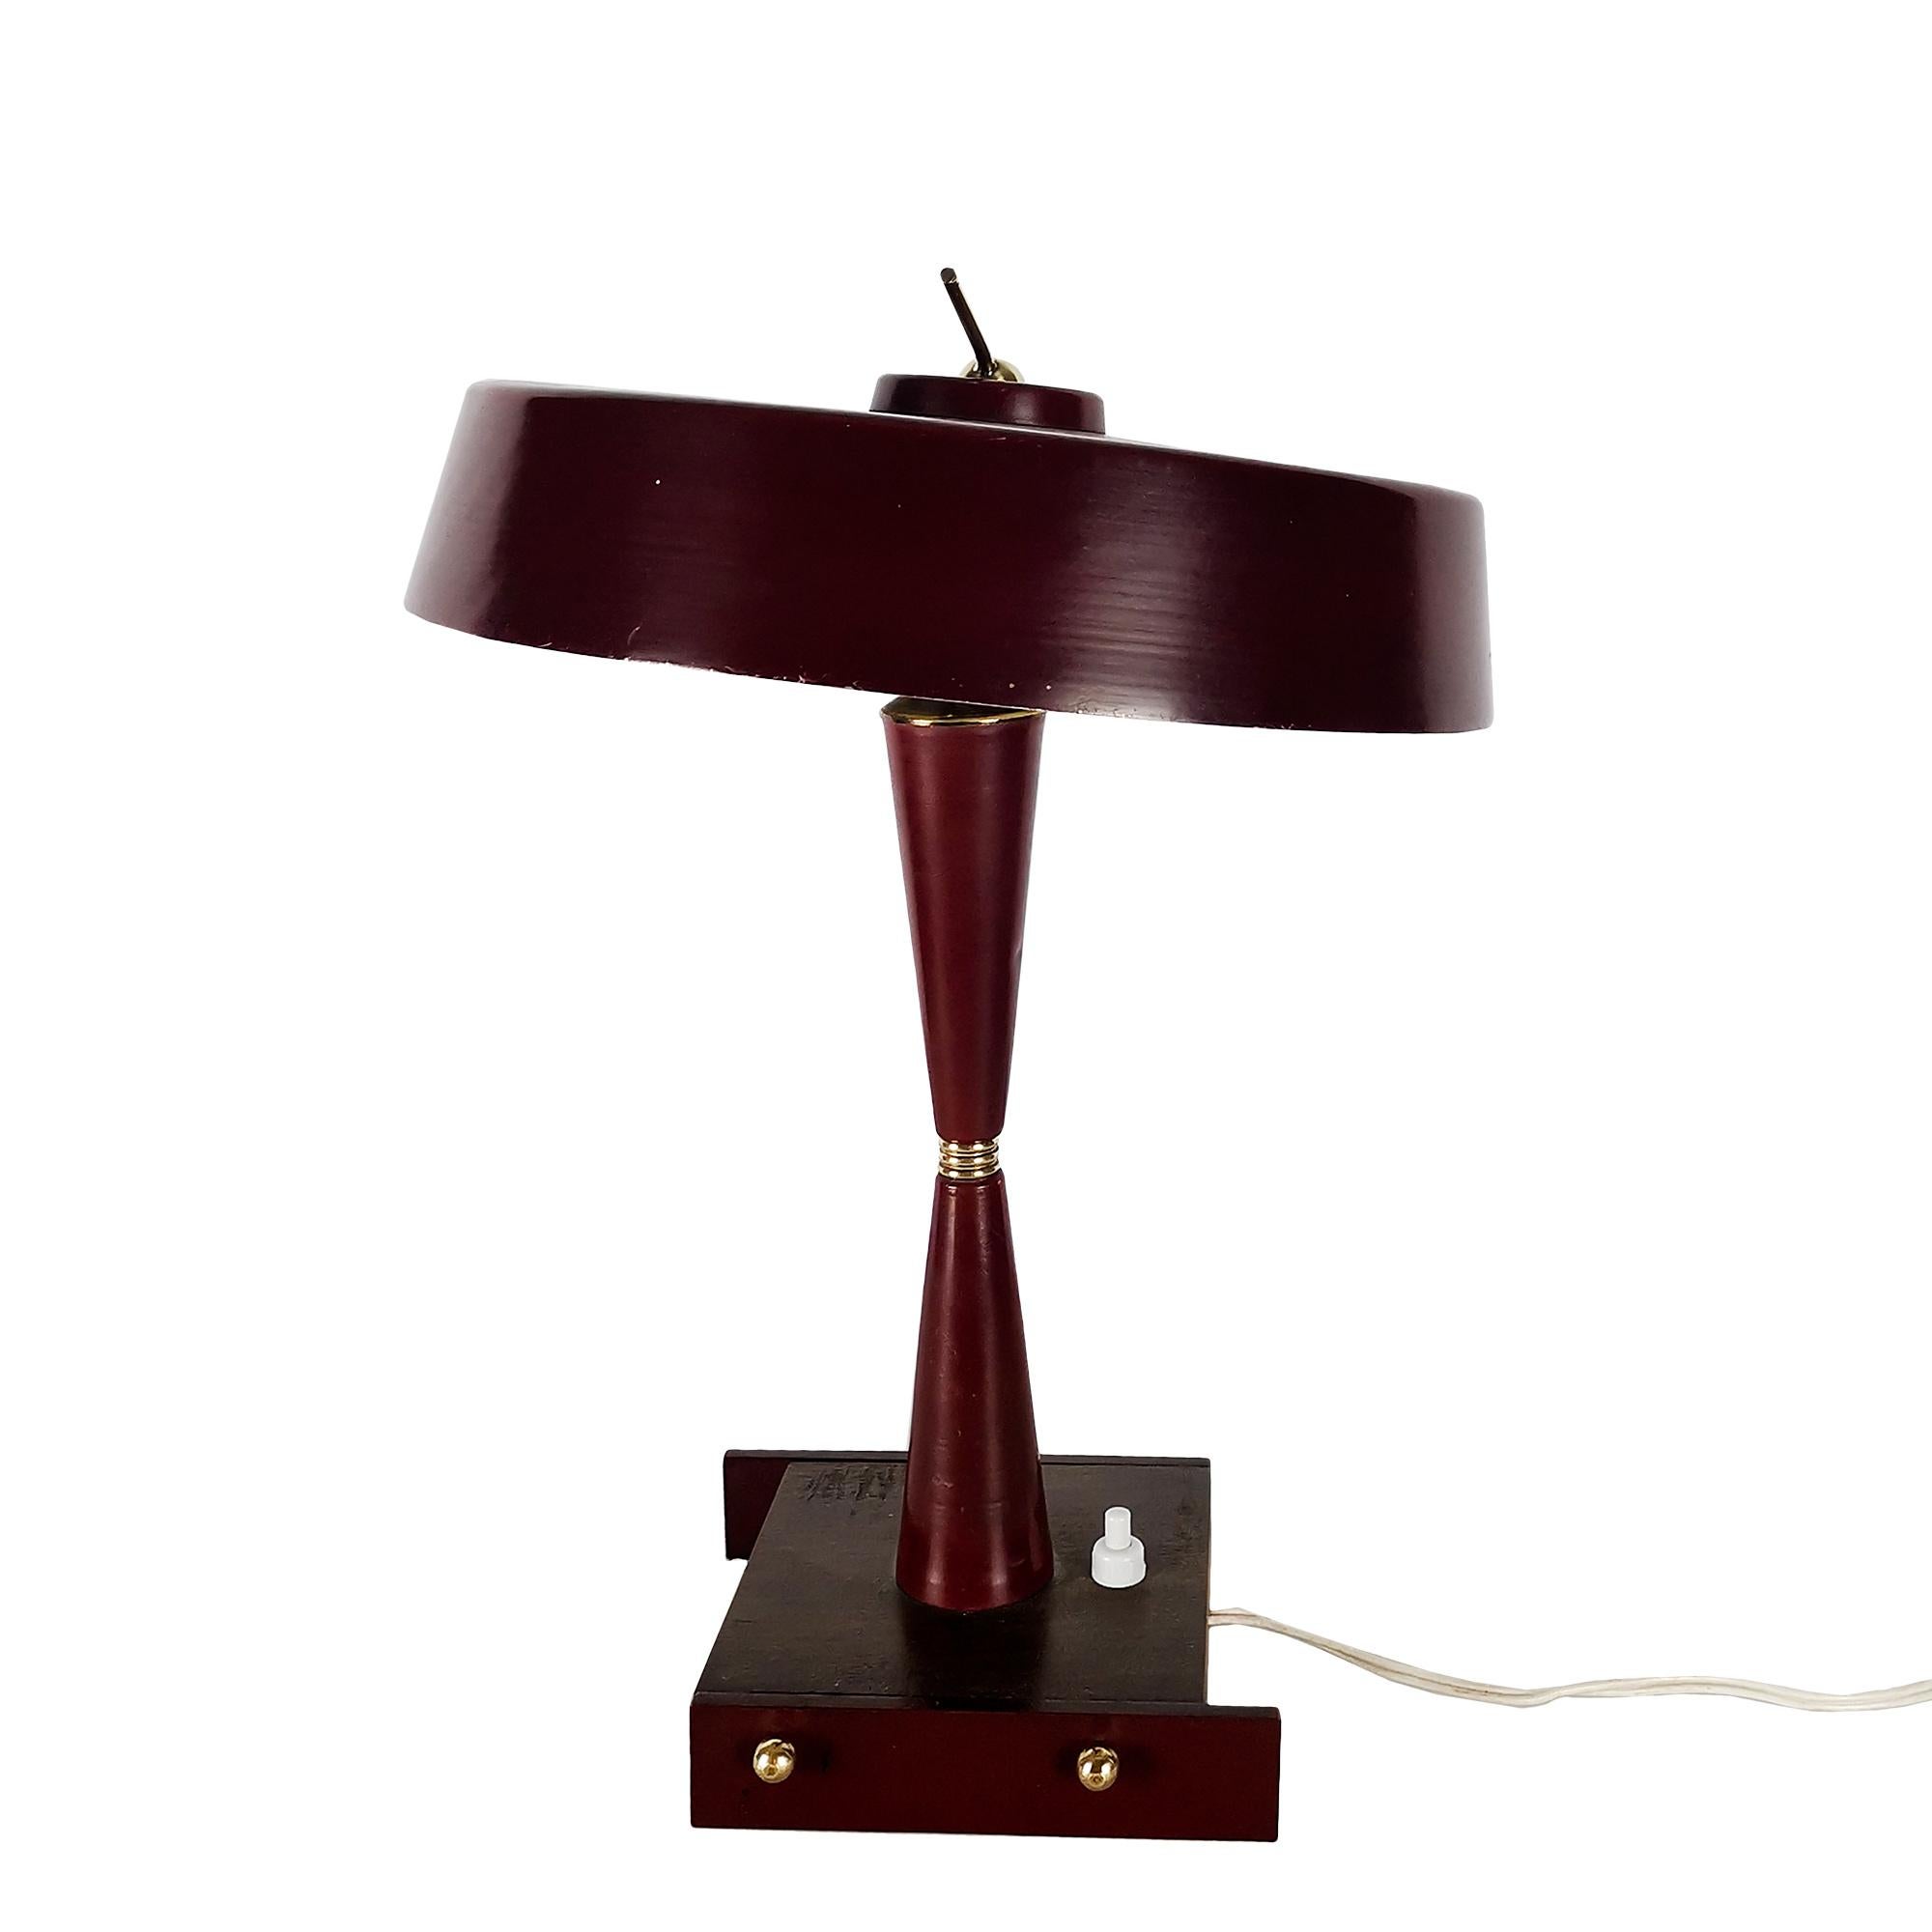 Italian Mid-Century Modern Table Lamp by Stilux In Burgundy Steel and Aluminium - Italy For Sale